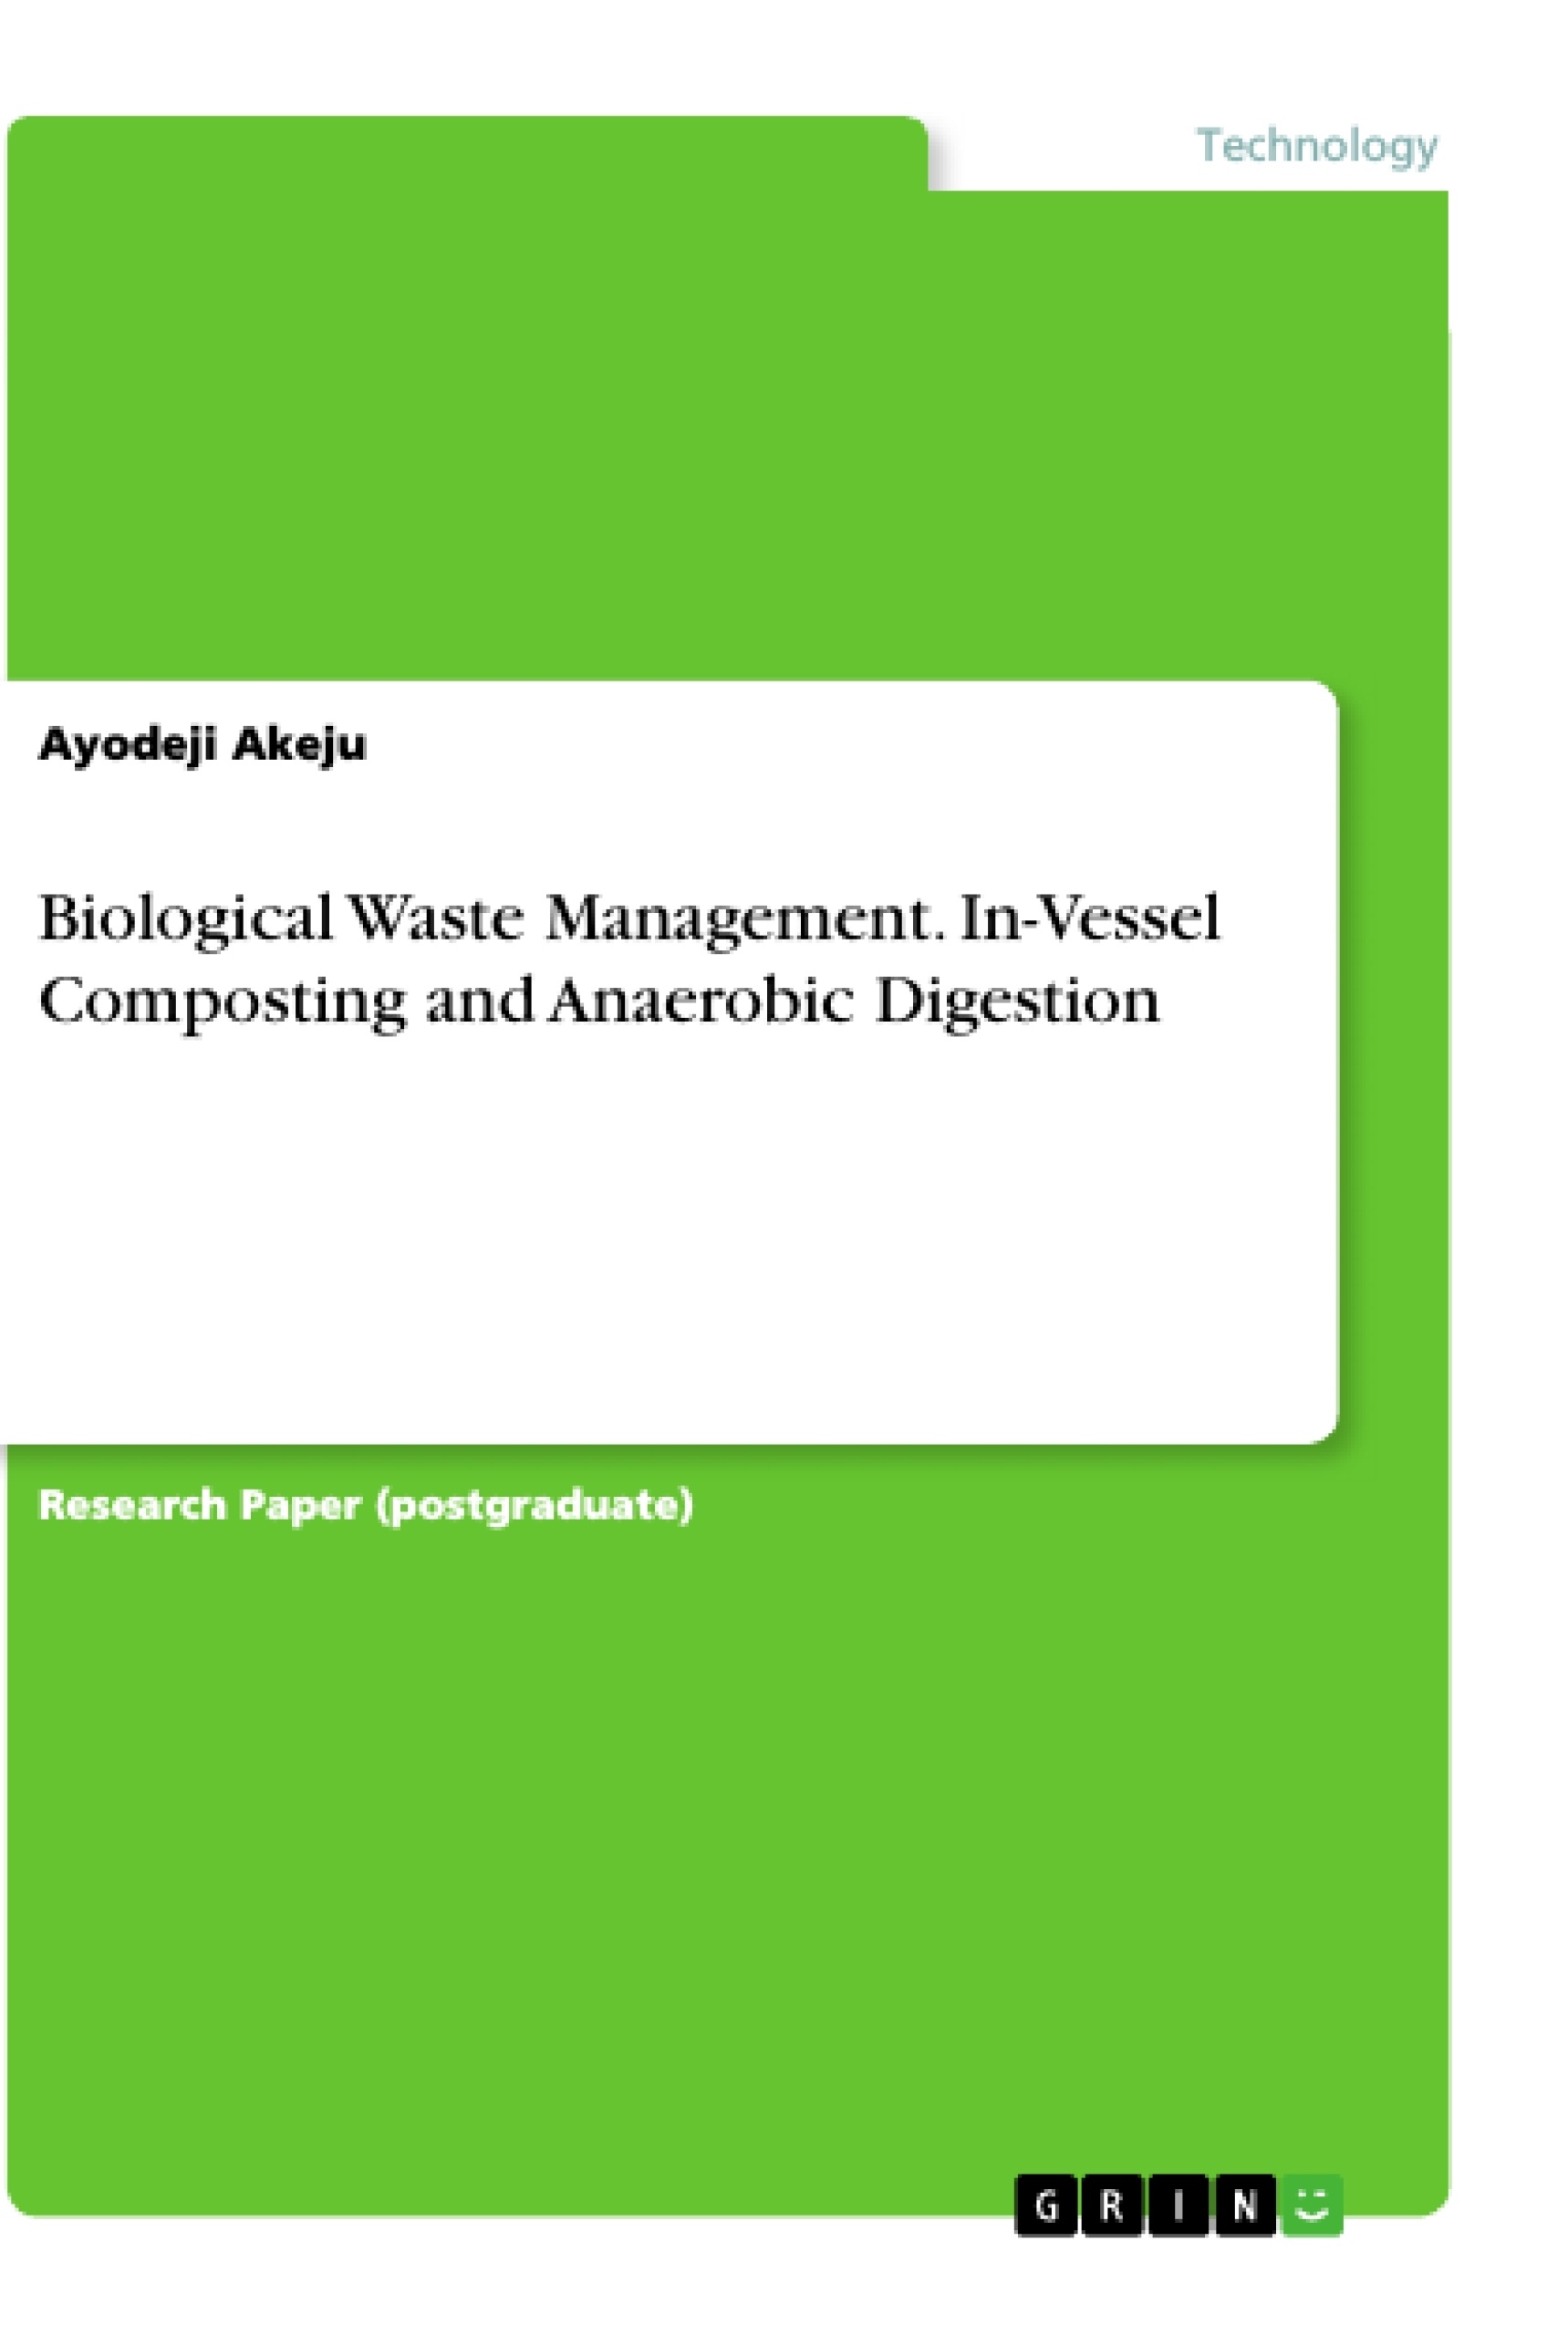 Title: Biological Waste Management. In-Vessel Composting and Anaerobic Digestion